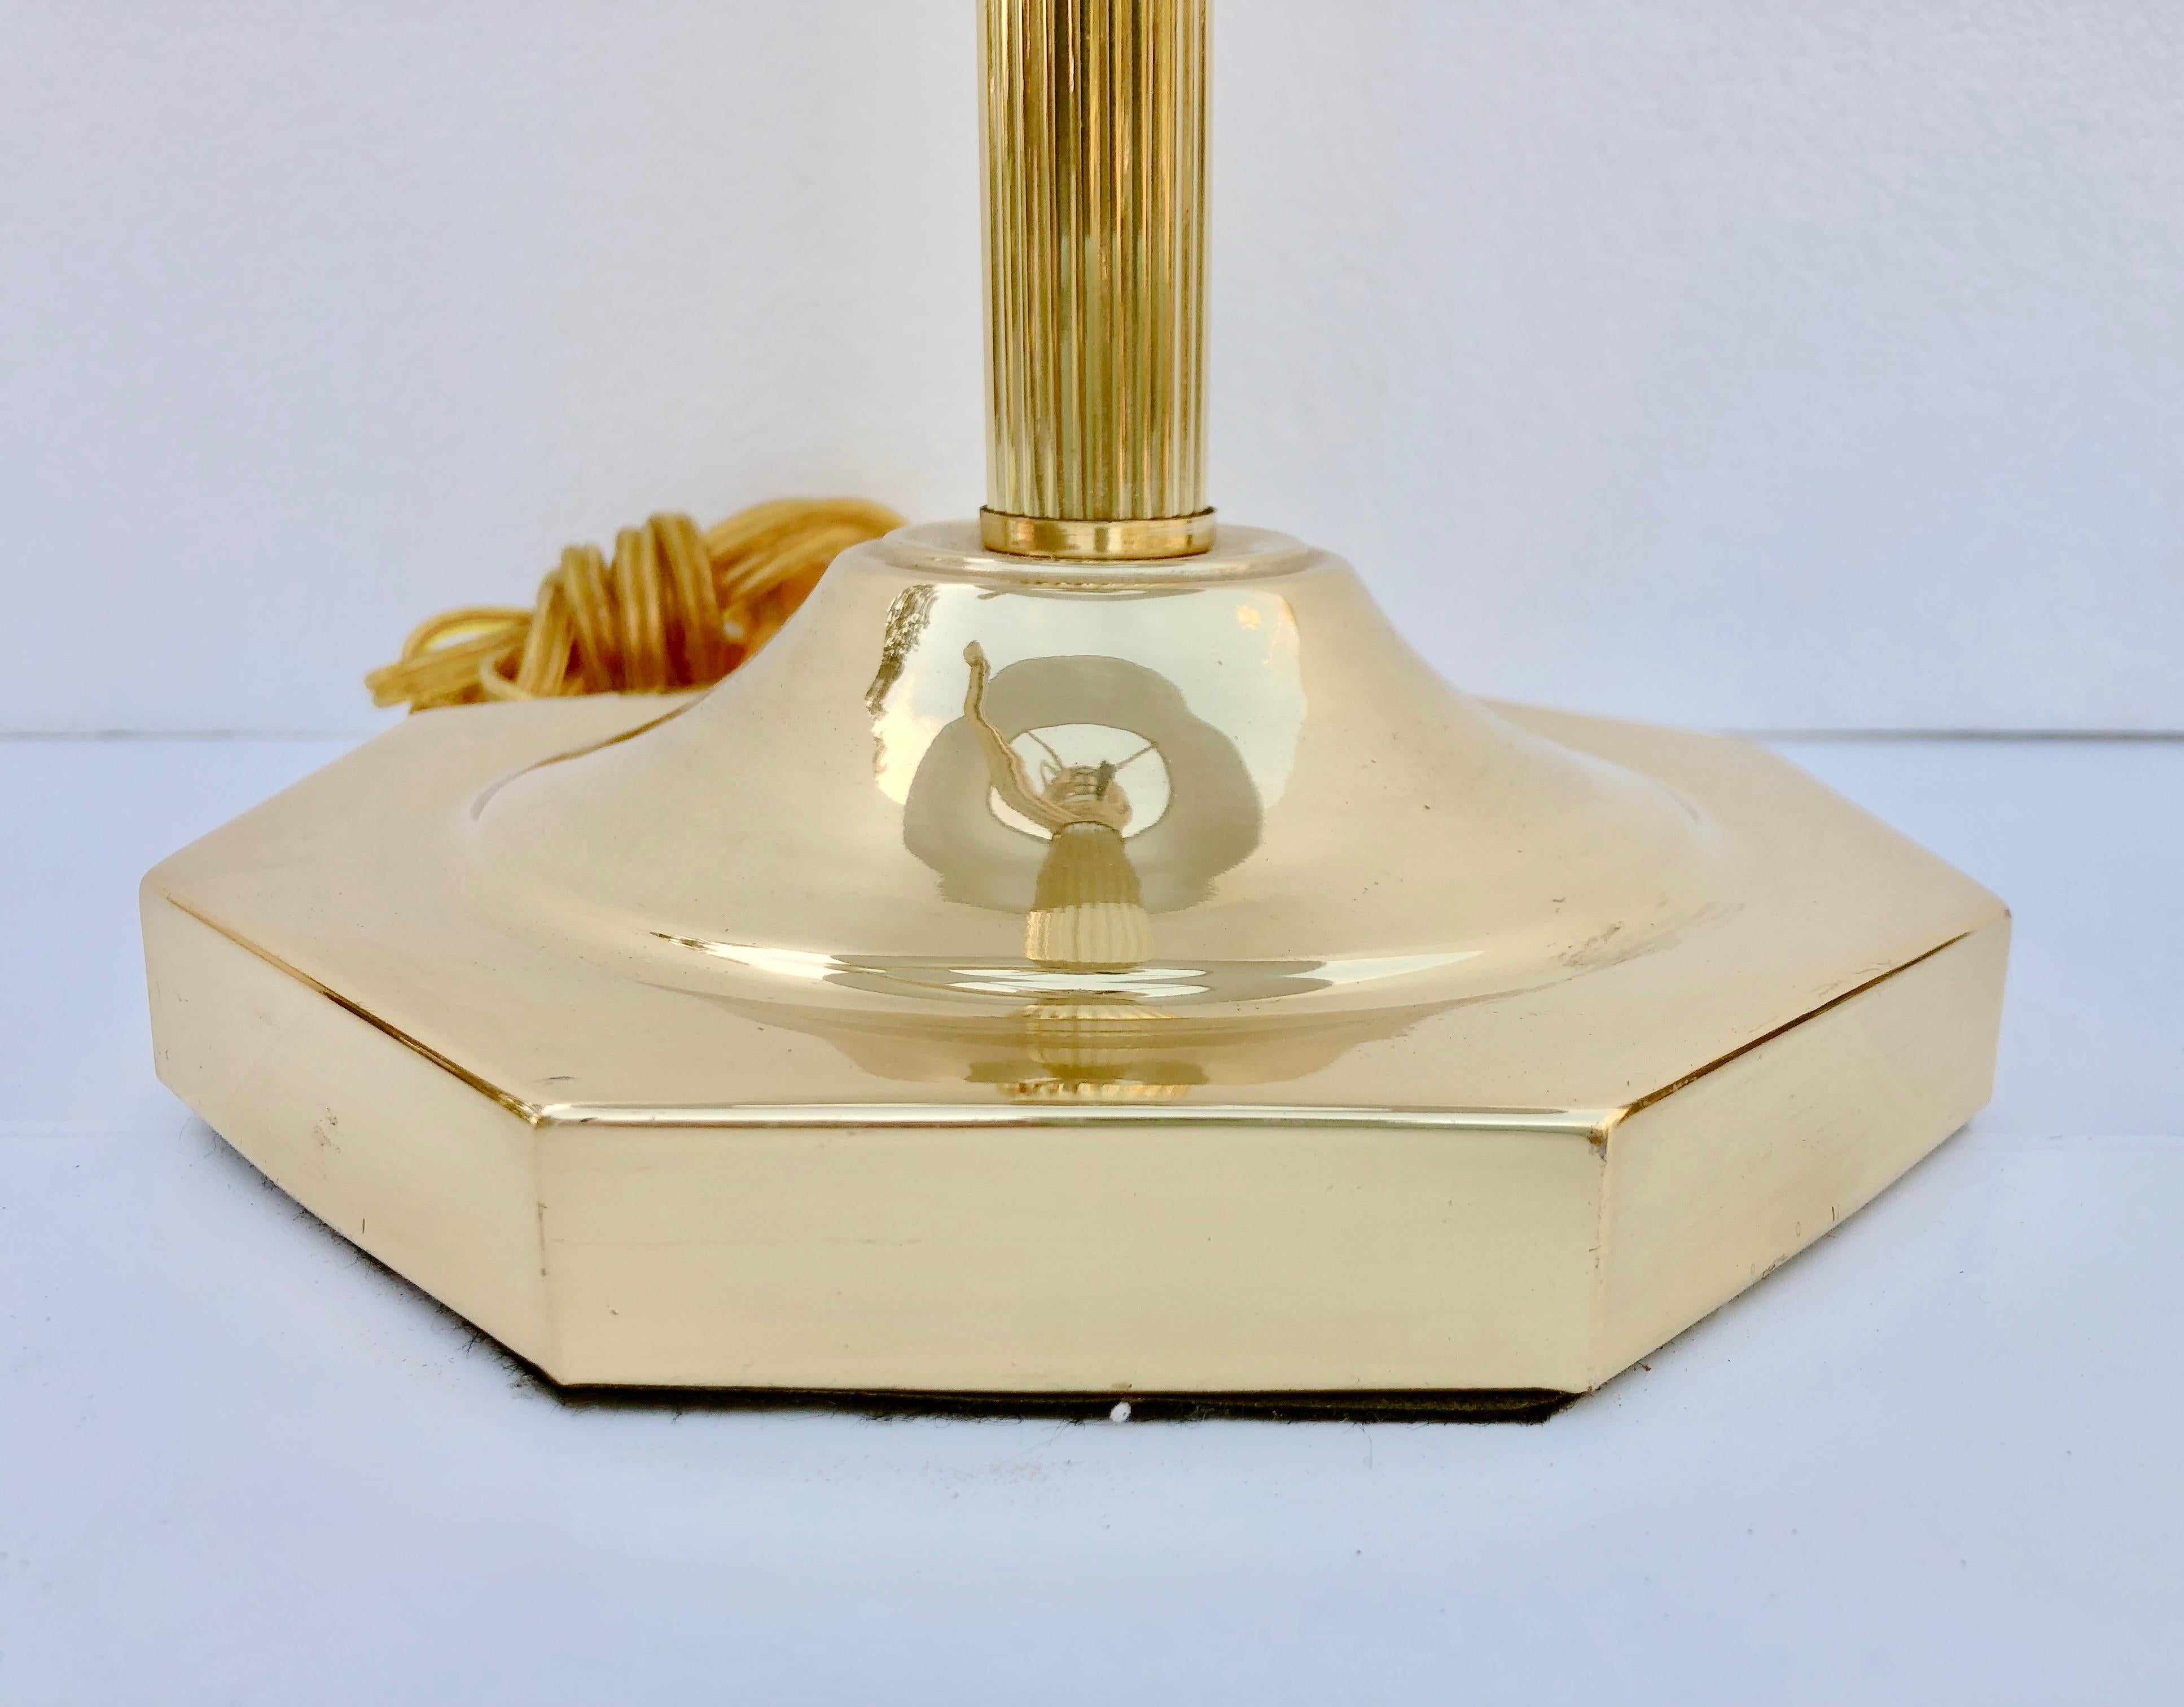 This is a wonderful gold metal desk or reading lamp with an arm that extends for easy adjustment. It has a gold circular finial and a solid octagonal base. It would add style to any desk, library or side table.

Lamp shade size H 5 x W 11.5.